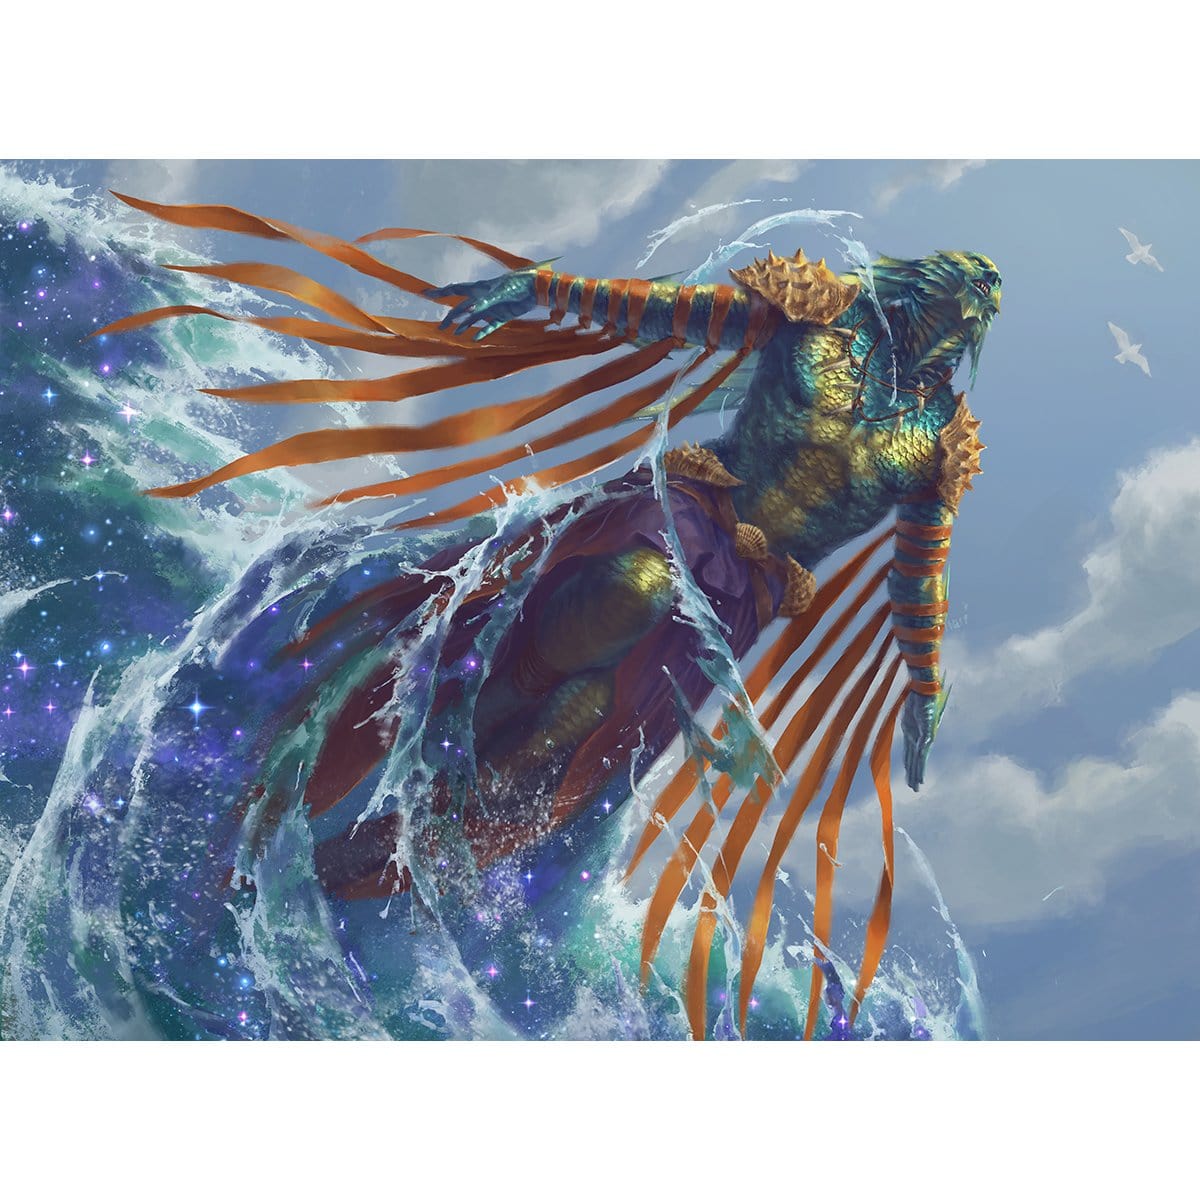 Triton Waverider Print - Print - Original Magic Art - Accessories for Magic the Gathering and other card games